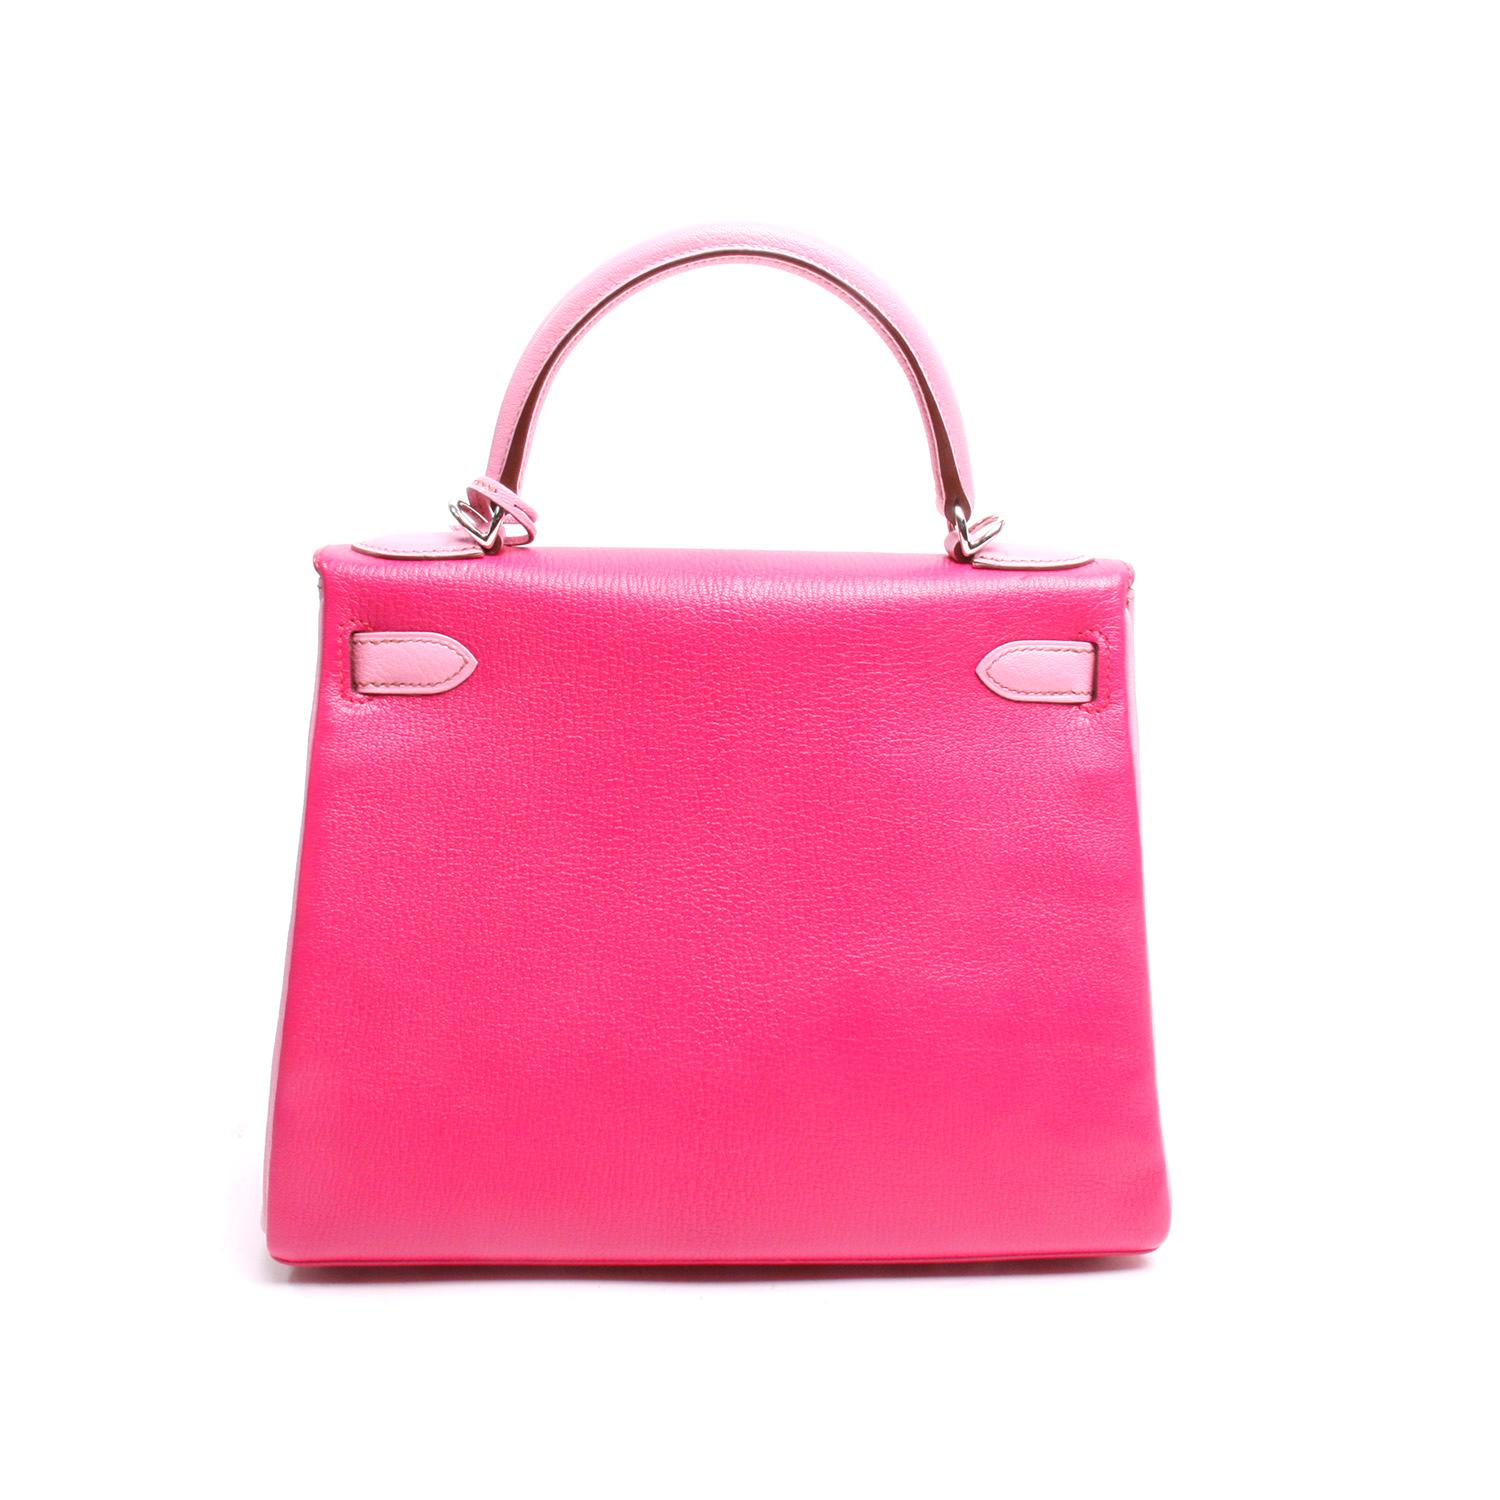 Special Order; from the 2012 Collection. This Kelly bag in bi-color fuchsia and pink Chevre leather with palladium hardware. Featuring contrast stitching, a front toggle closure, a clochette with padlock and two keys, a single rolled handle and